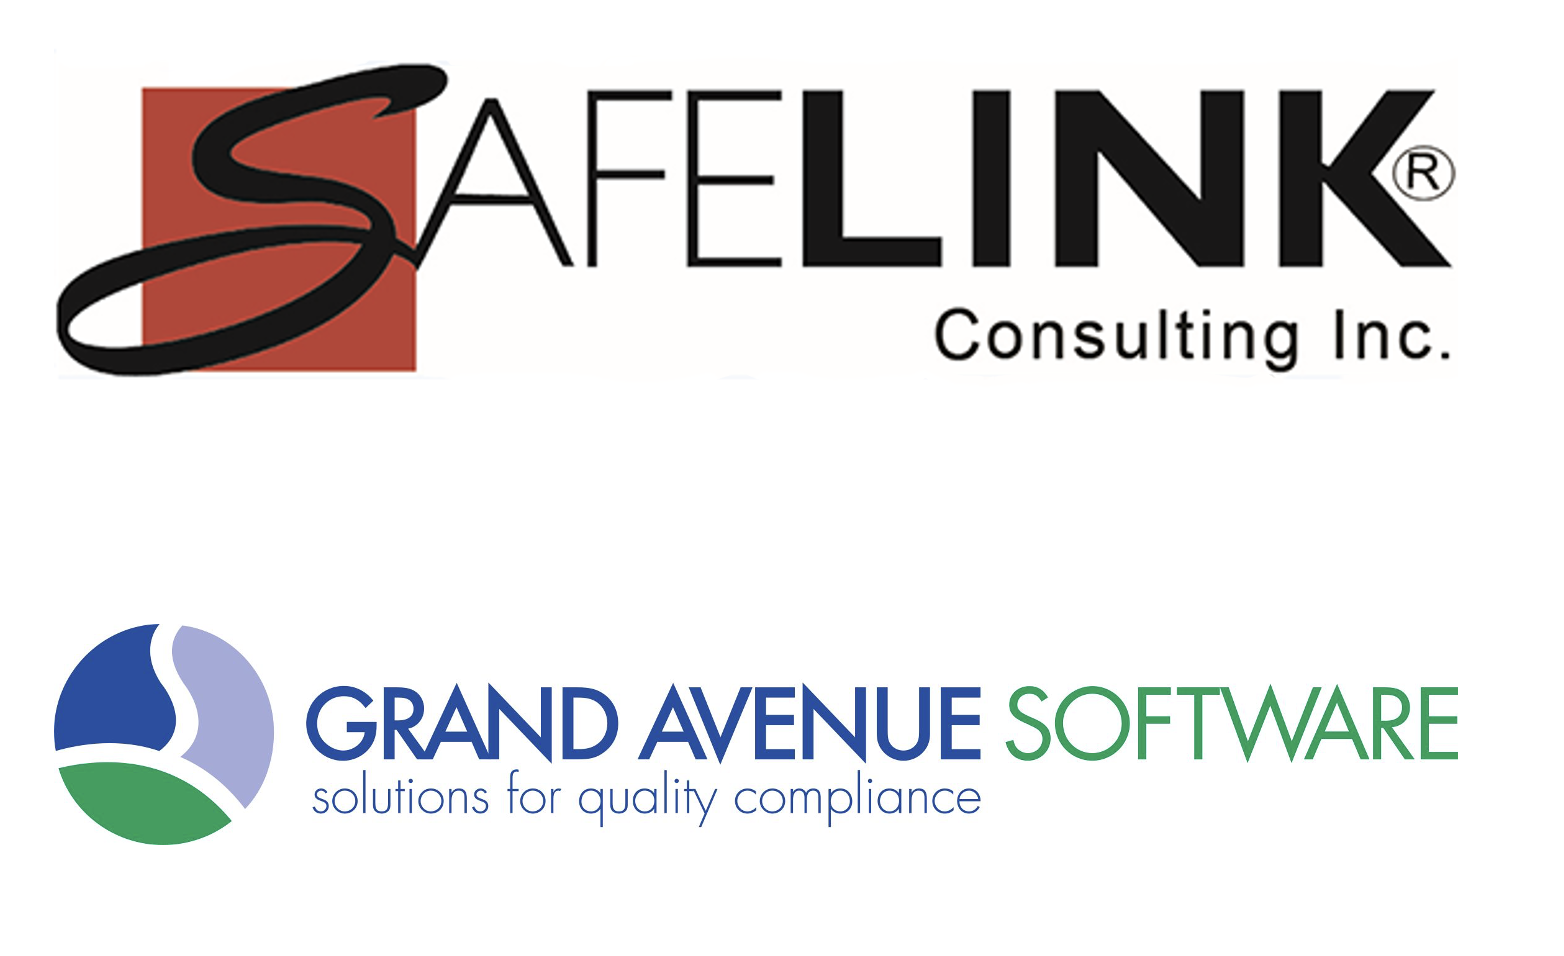 Grand Avenue Software and SafeLink Consulting Working Together to Help Companies with FDA Process and Compliance | Image Credit: © Grand Avenue Software and SafeLink Consulting, Inc